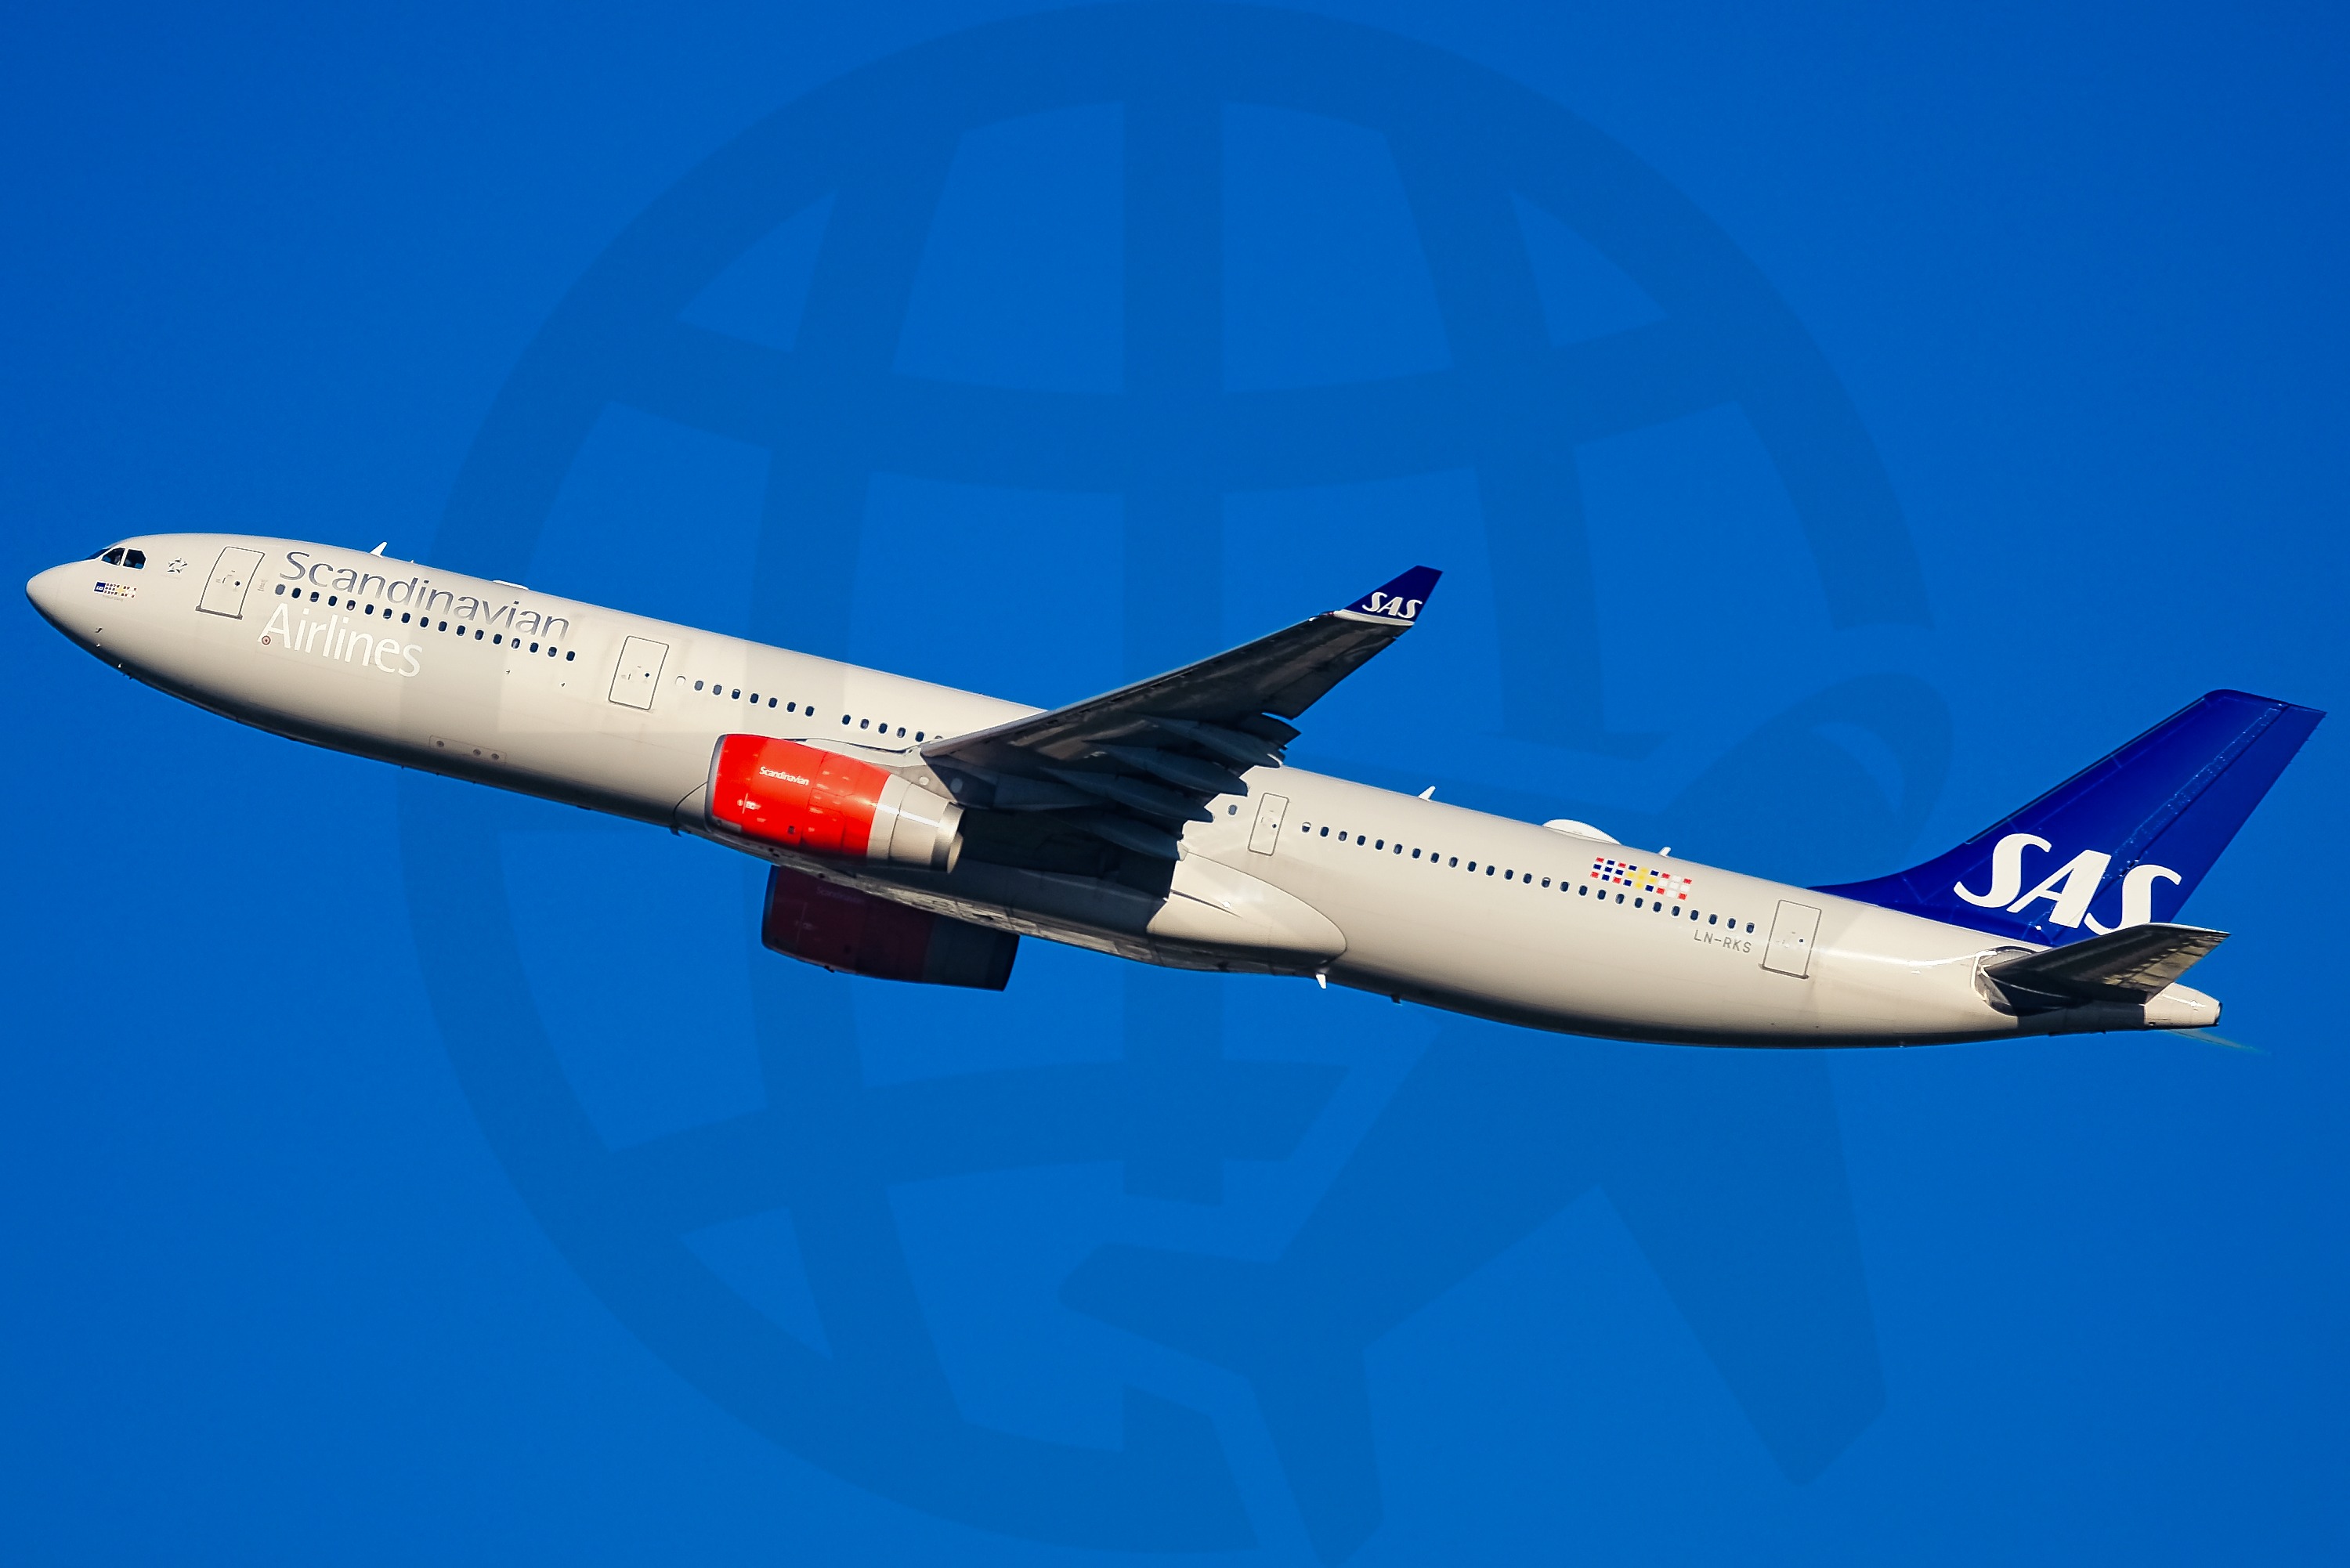 Photo of LN-RKS - Scandanavian Airlines Airbus A330-300 by 